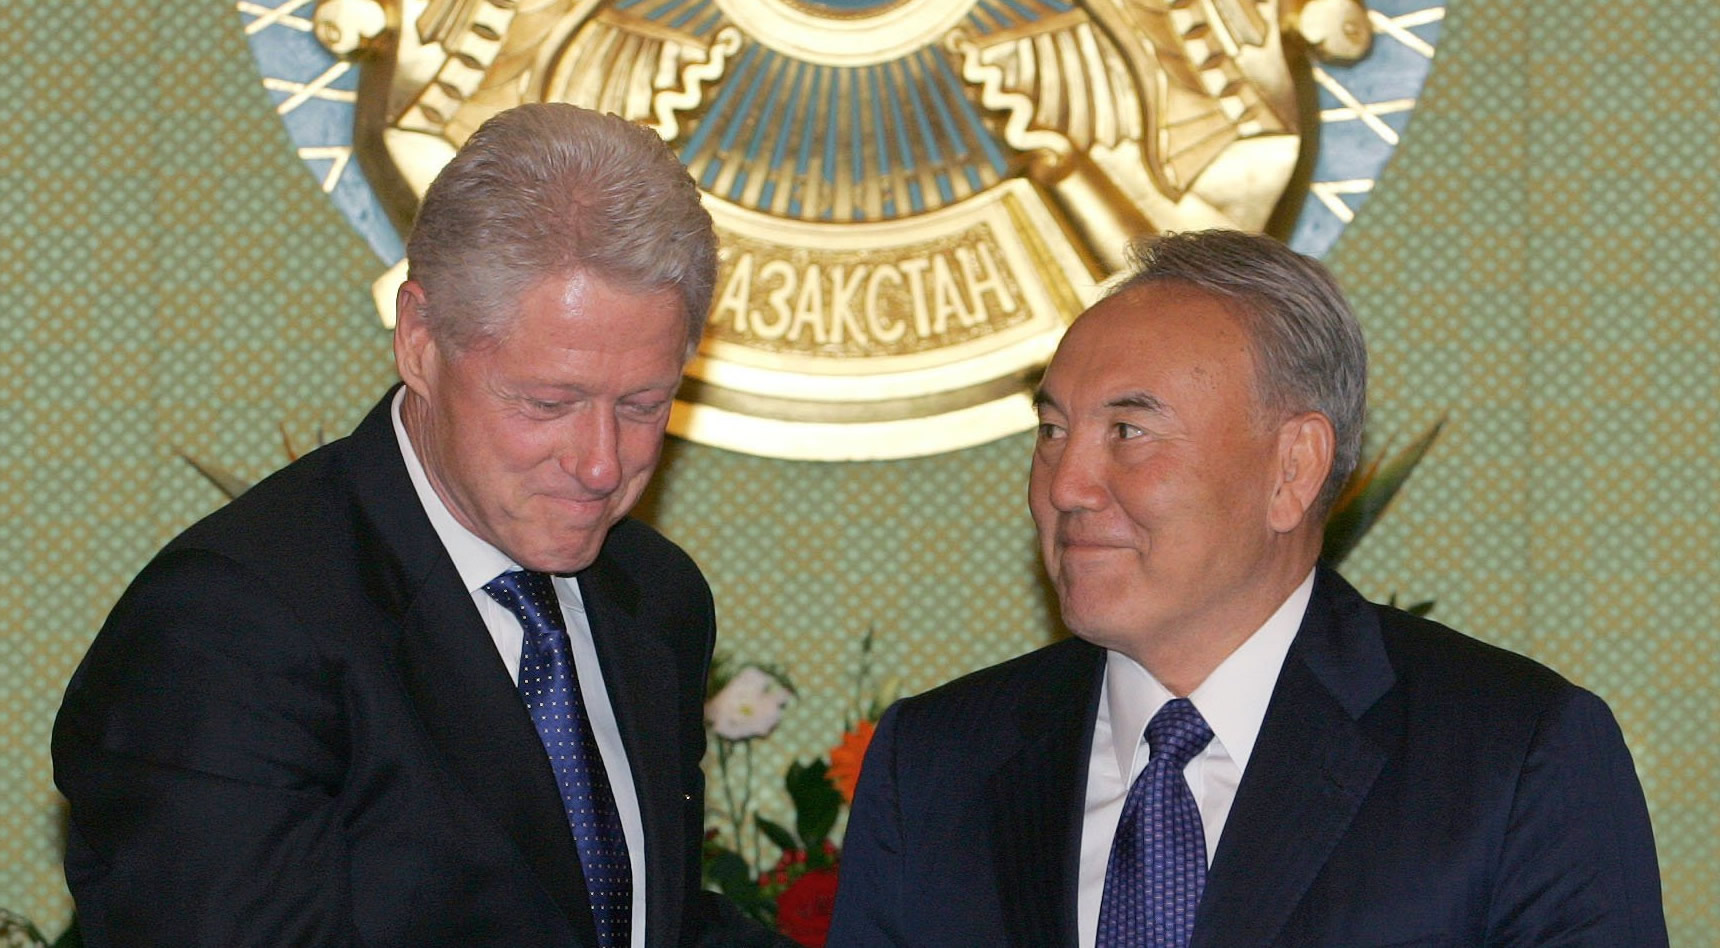 On Sep. 6, 2005, Bill Clinton met with Kazakh strongman Nursultan A. Nazarbayev. Two days later, Bill’s friend, Frank Giustra, received coveted Kazakh uranium mining rights—even though Giustra had no uranium mining track record. The industry was stunned. Within months, The Clinton Foundation received $152 million in “donations” from Frank Giustra. Two years later, Giustra sold those rights for $3.1 billion. Hillary and Bill did not disclose their Foundation winnings until forced to recently by Canadian authorities. Goldman Sachs assisted Giustra, and everyone else swirling around the Clinton's New World Order community organizing.